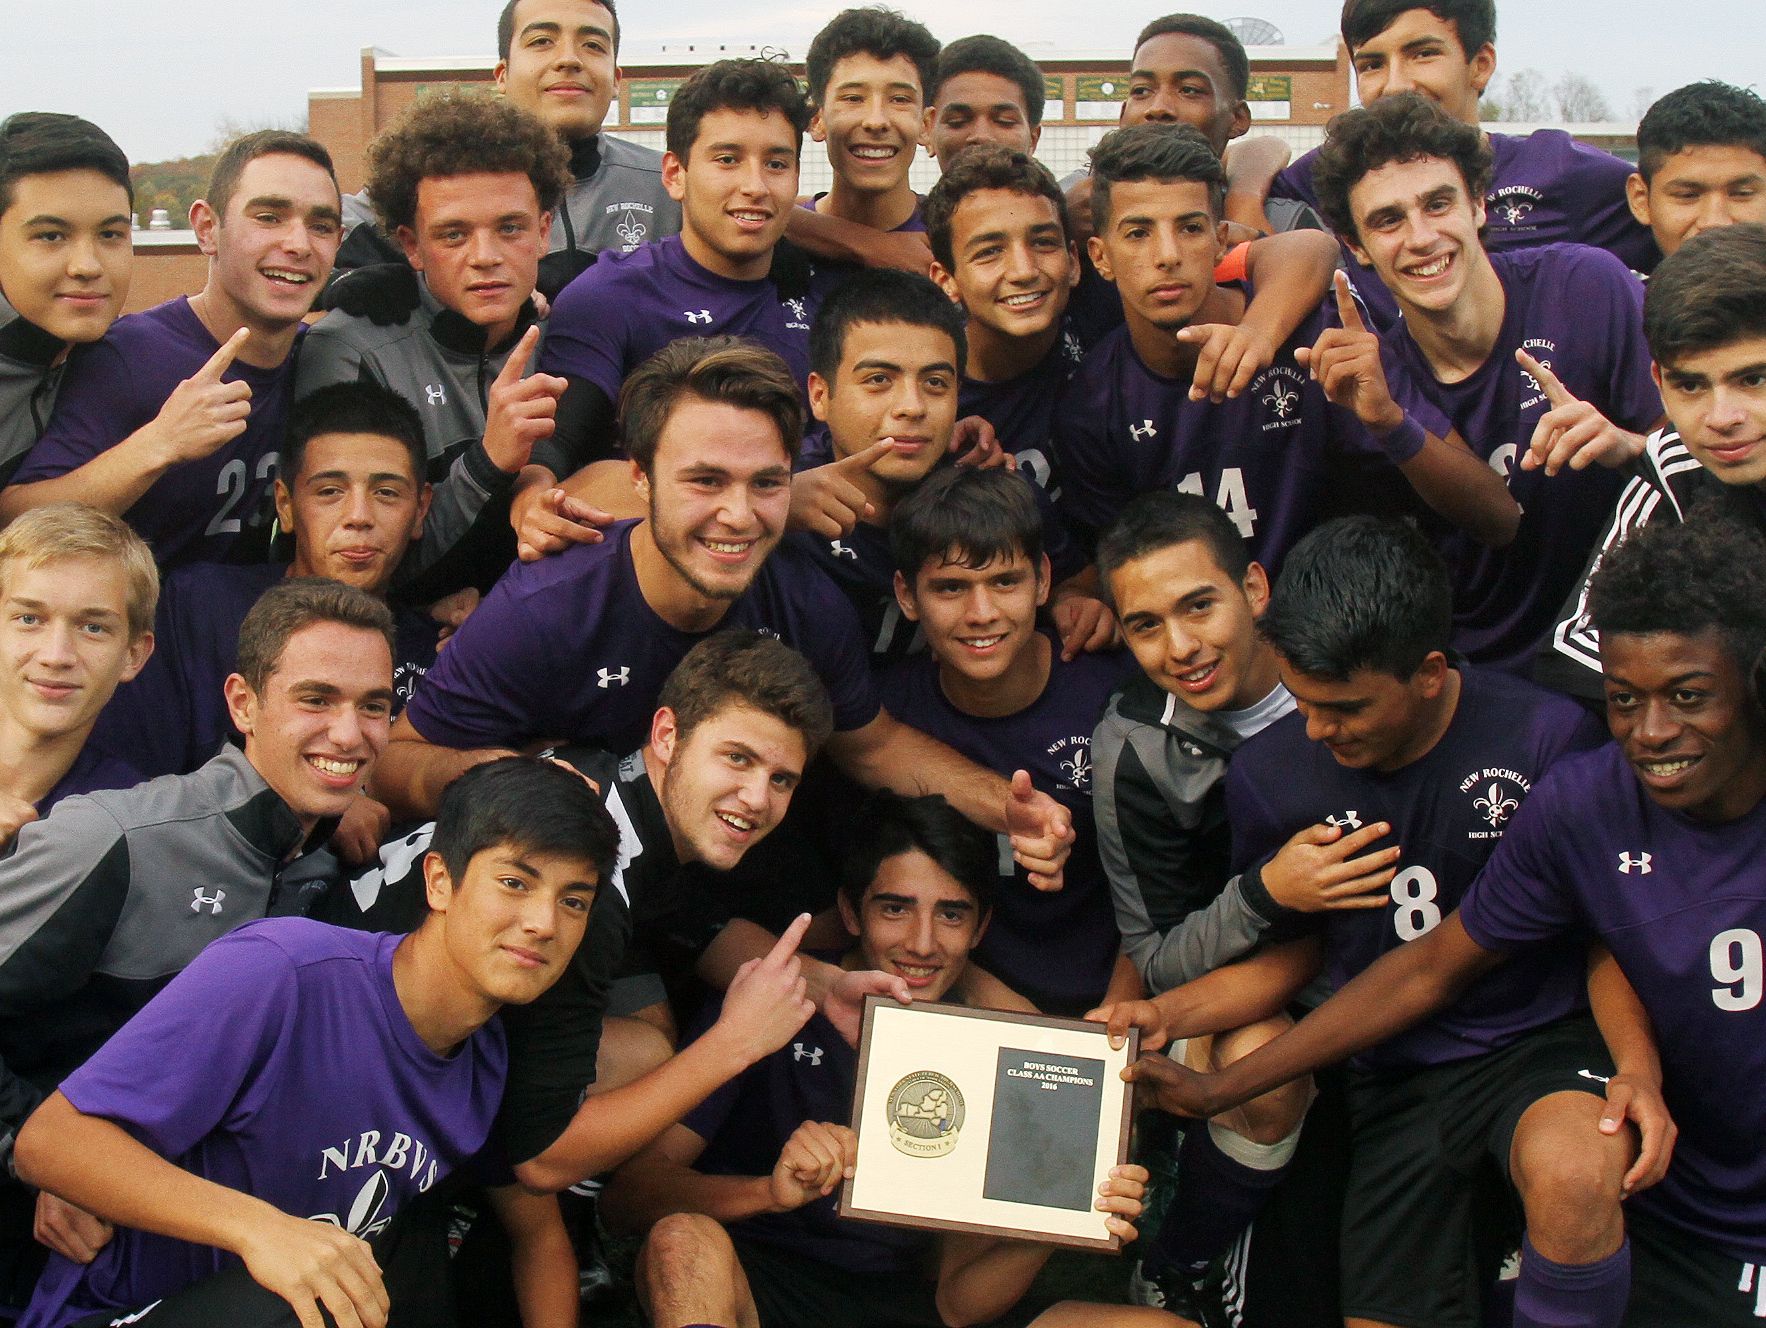 New Rochelle payers celebrate with the section 1 plaque after defeatingd Arlington 3-0 in the boys soccer Section 1 Class AA championship game at Lakeland High School in Shrub Oak High School Oct. 29, 2016.